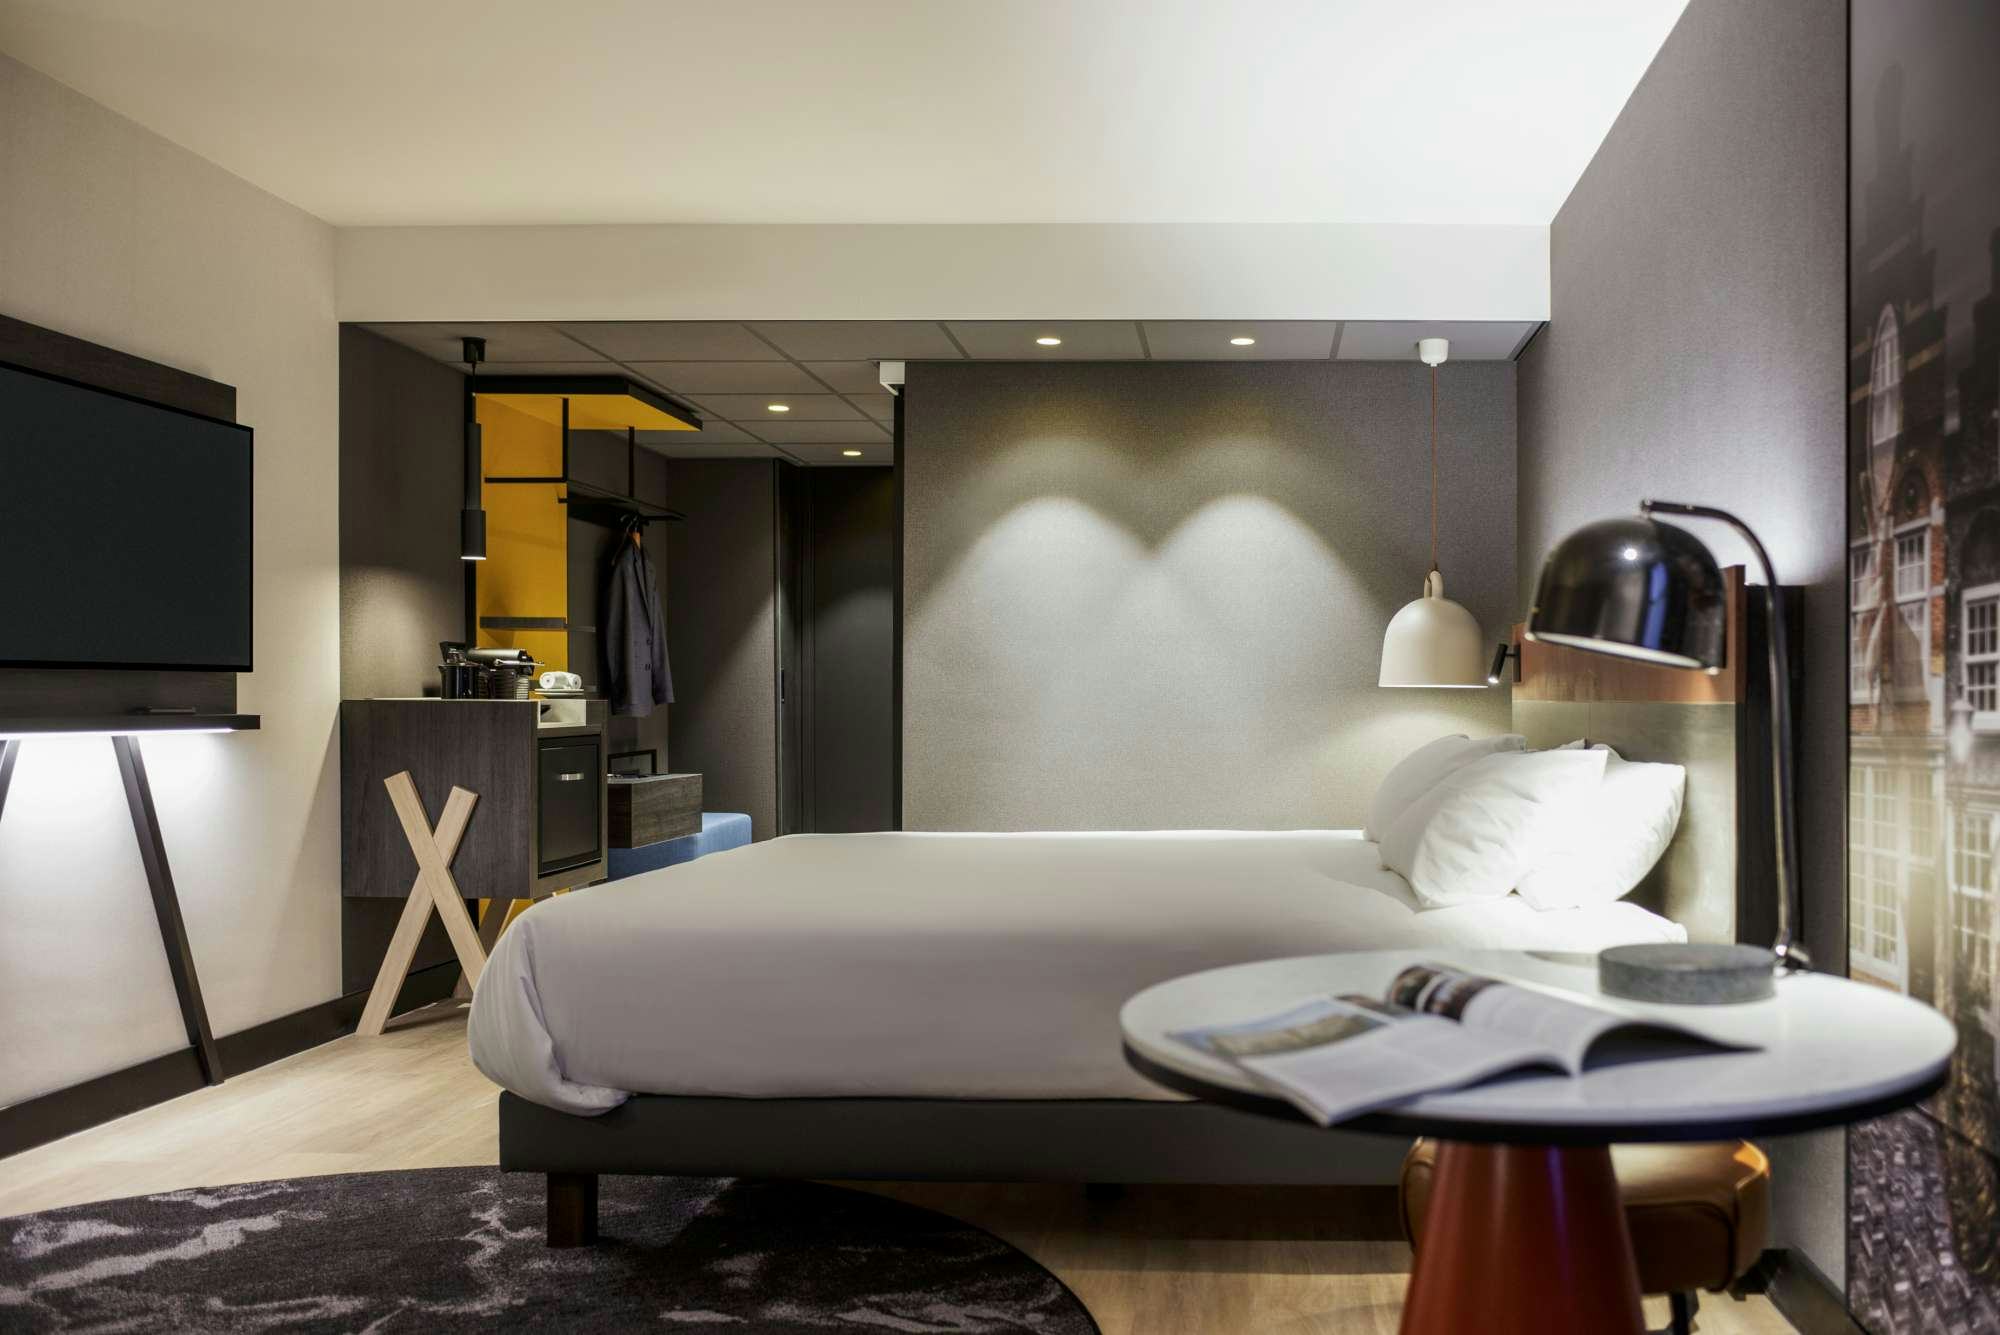 Mercure Amsterdam City opent 30 extended stay-kamers